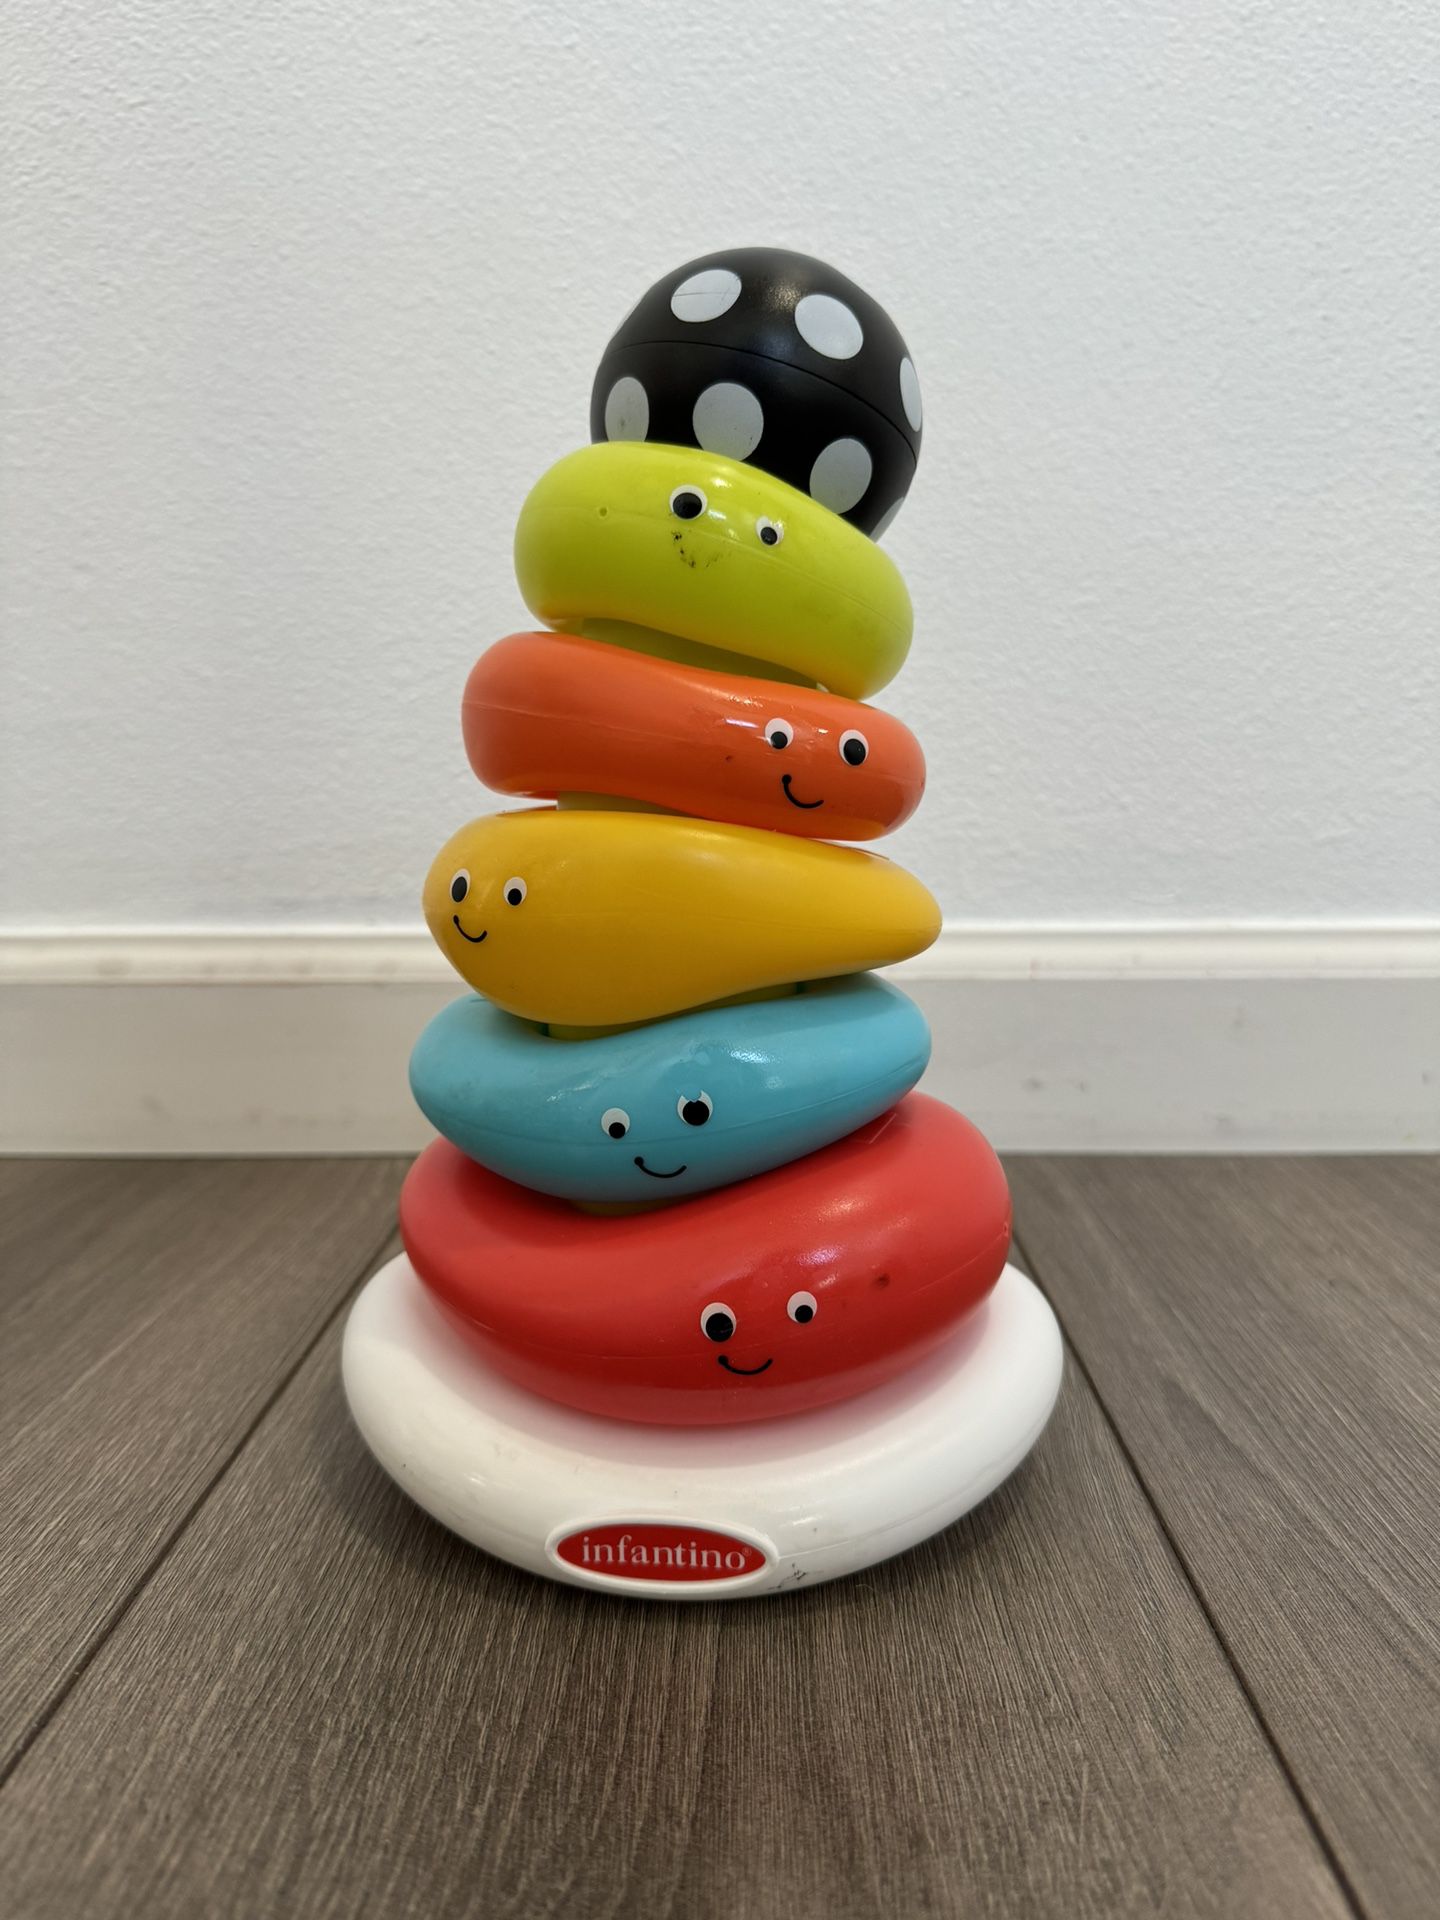 Infantino Funny Faces Ring Stacker Colorful Baby and Toddler Toys for Motor Skills